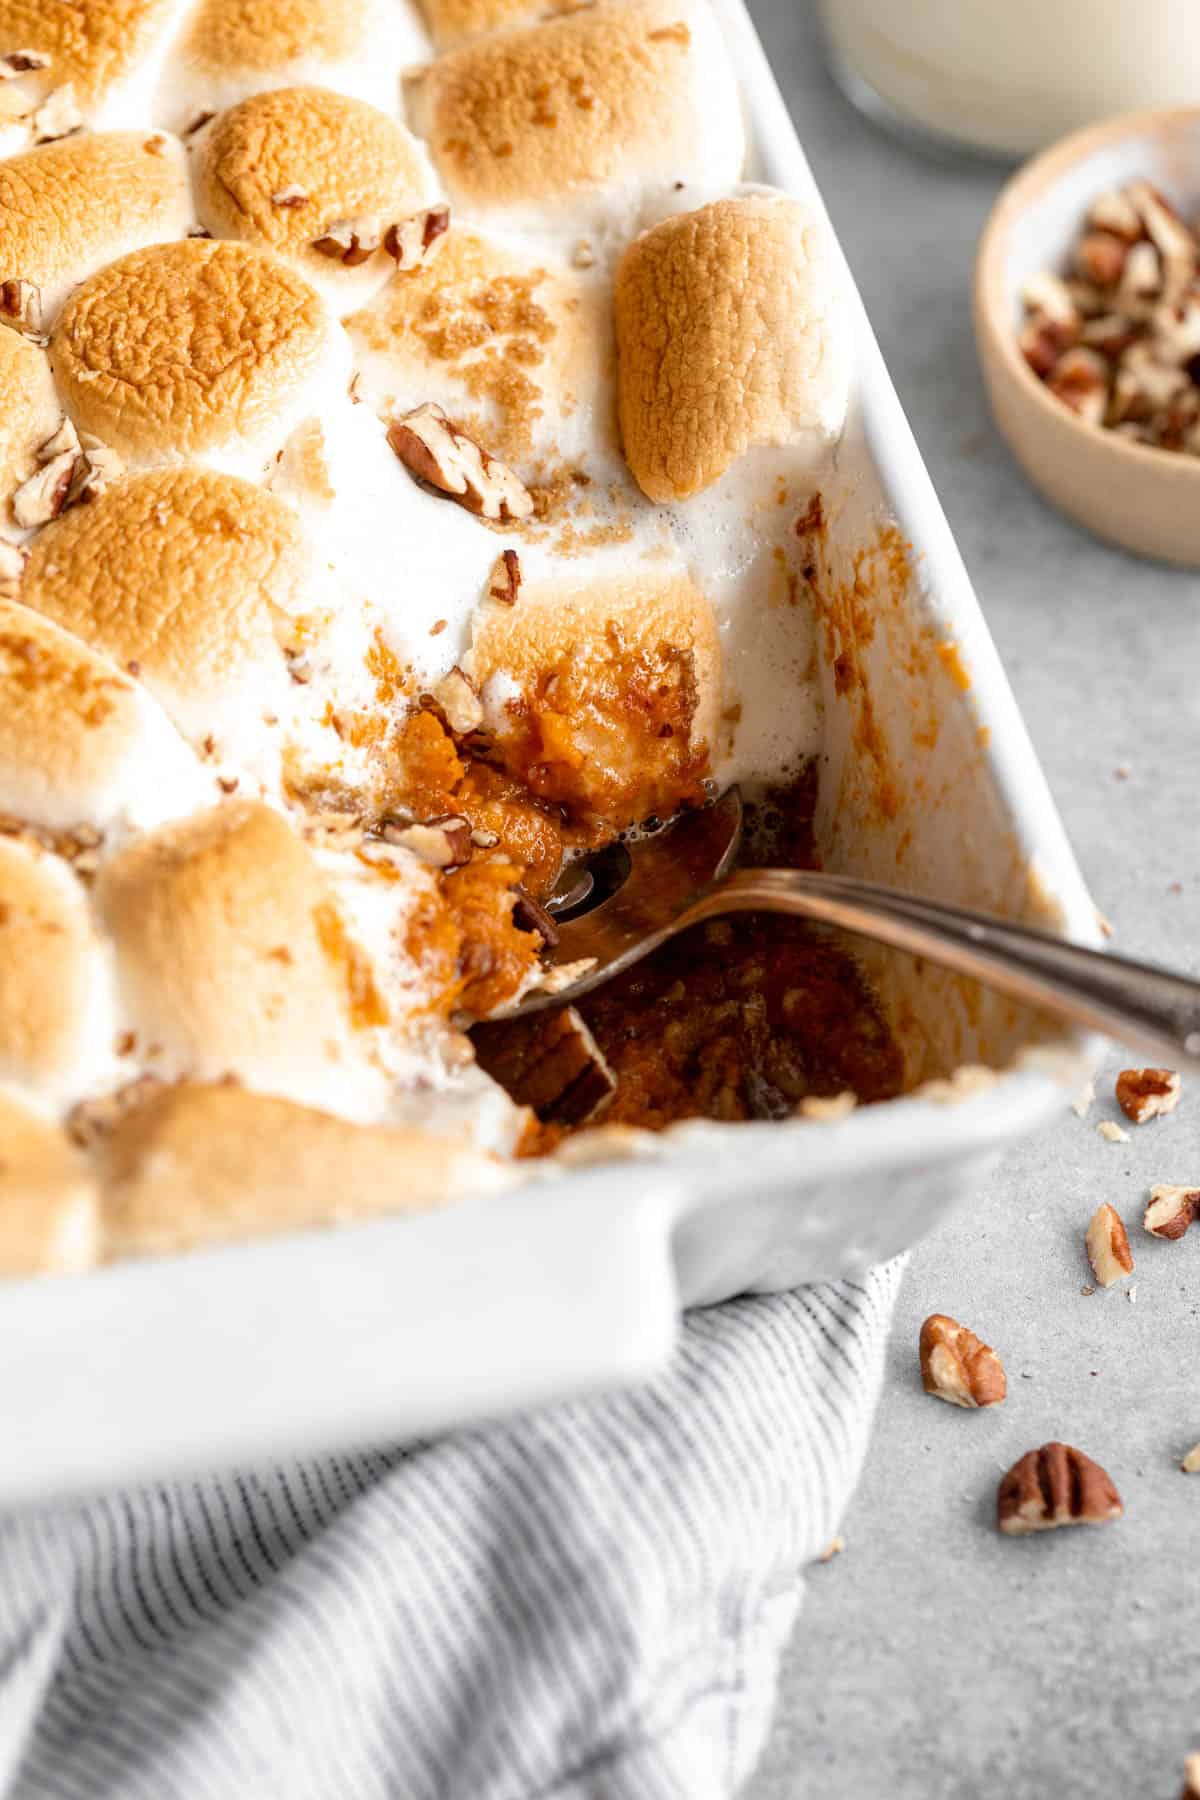 up close of the sweet potato casserole with pecans on top